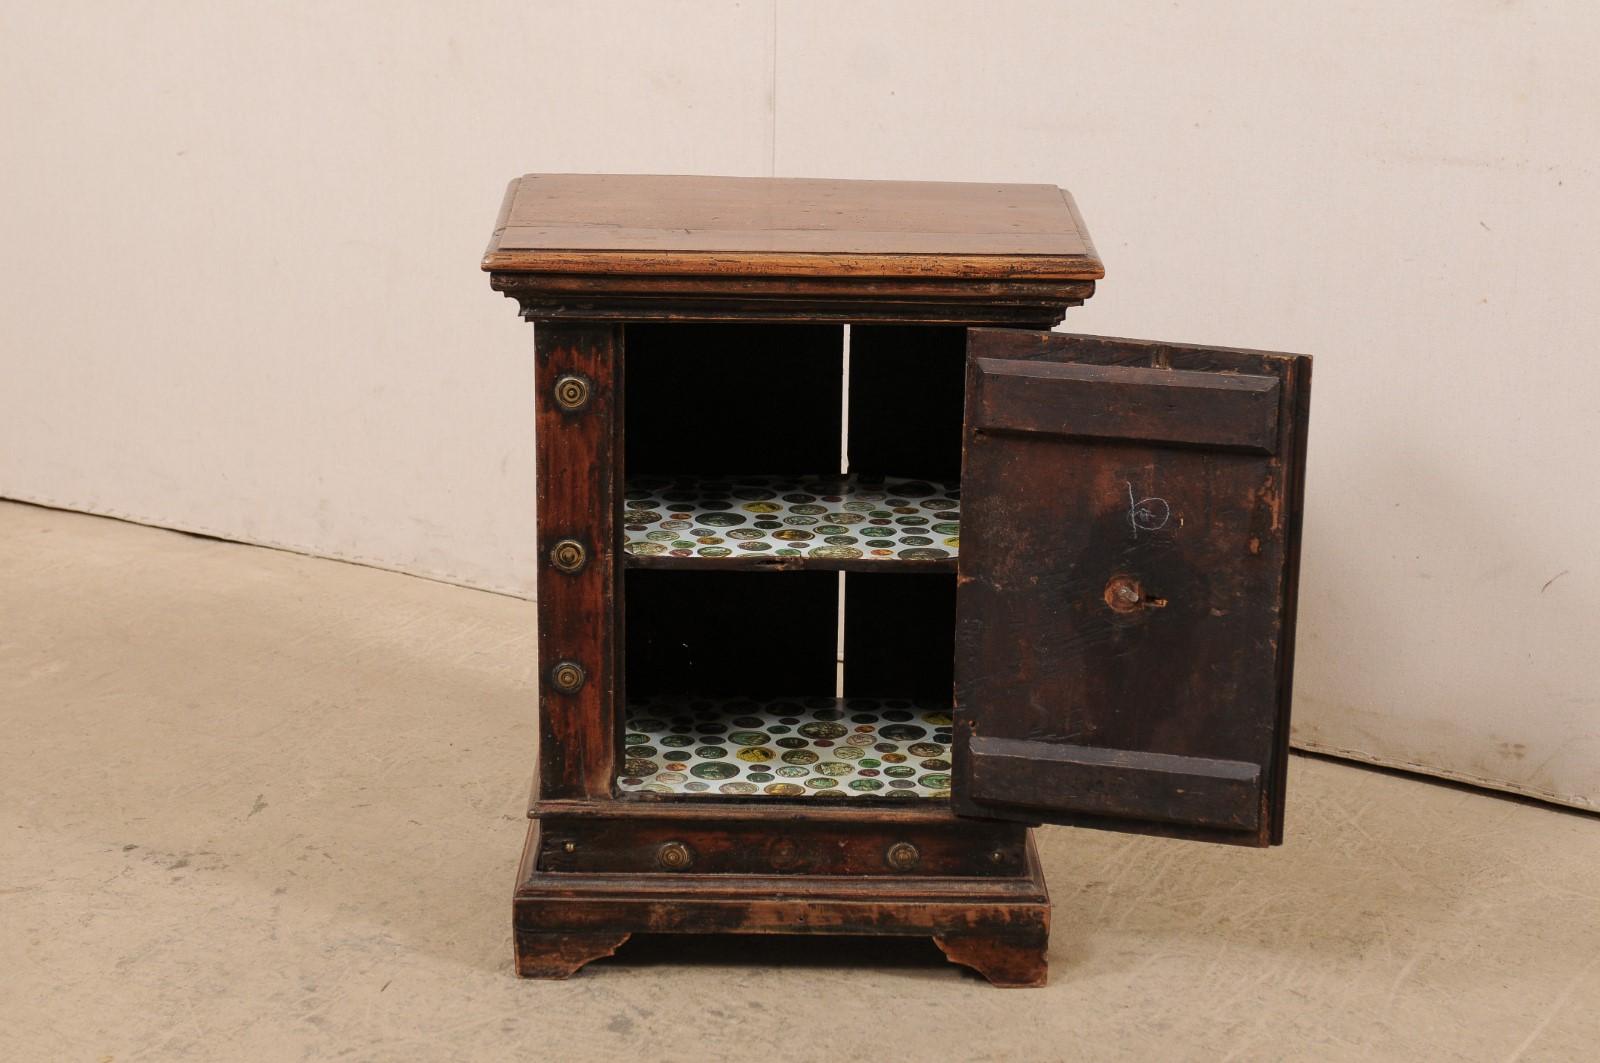 18th Century Italian Small-Sized Cabinet Adorn with Brass Medallion Accents For Sale 1